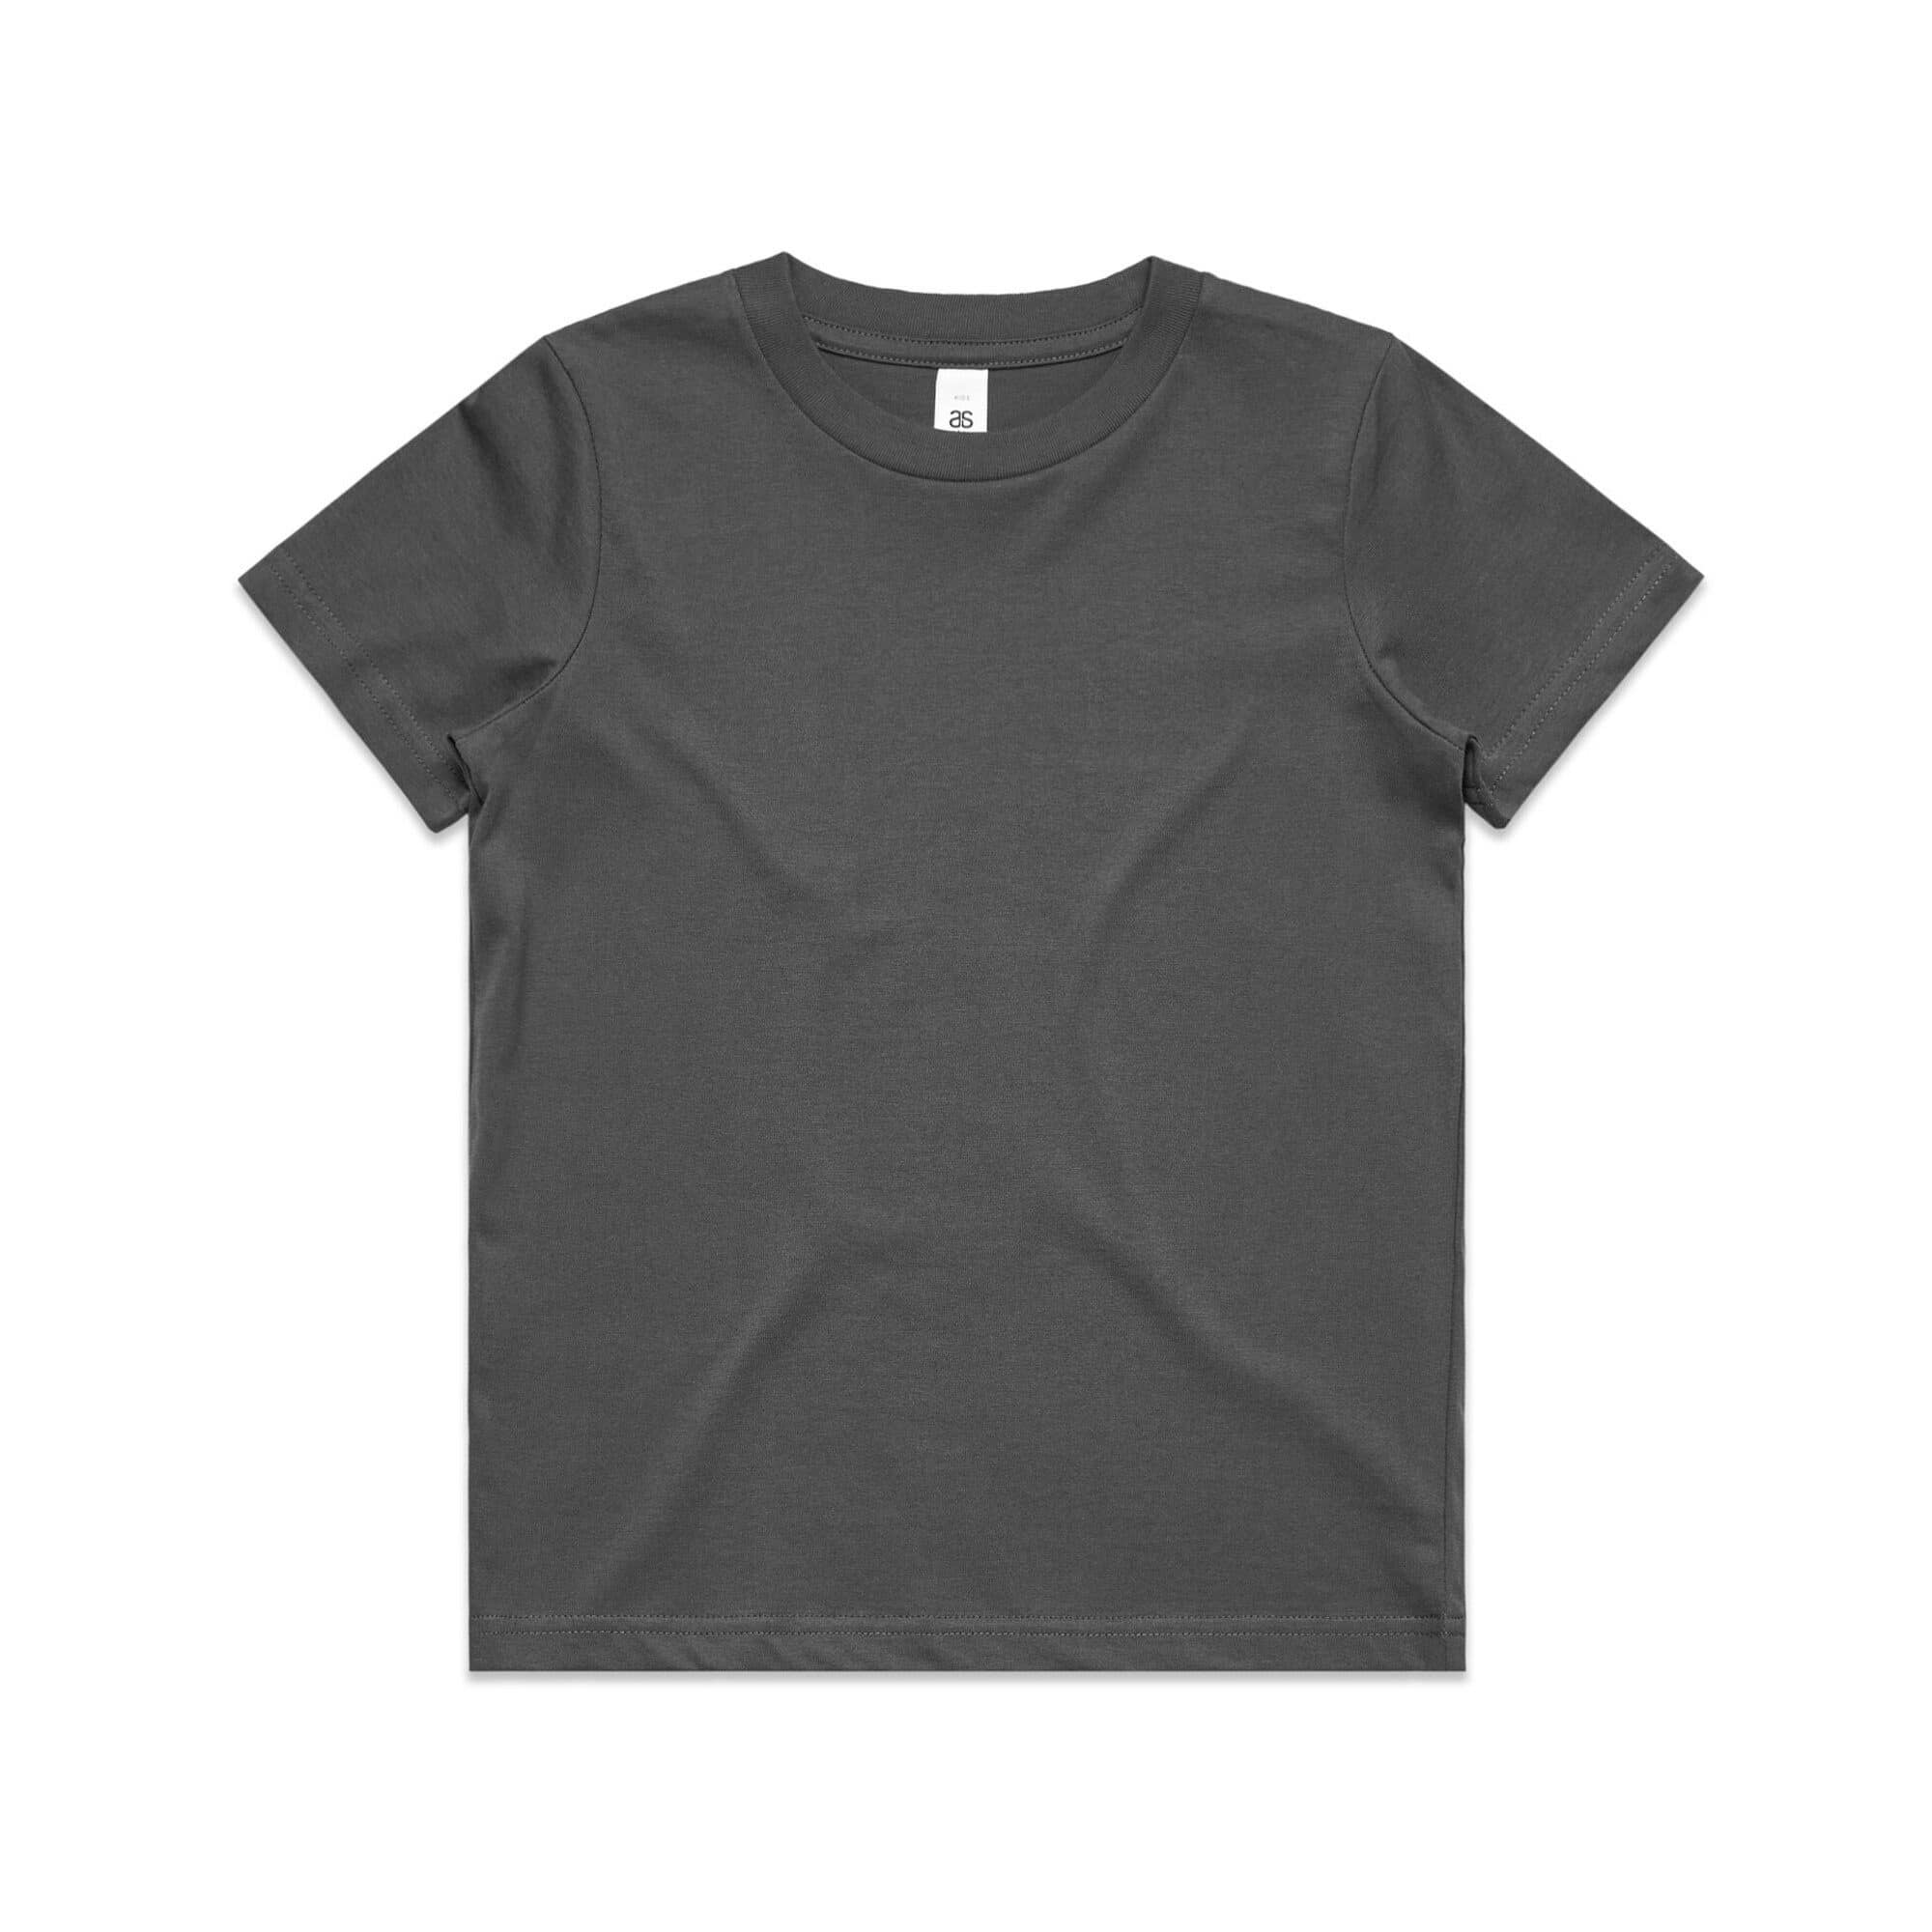 3006_AS_Youth-Tee_Charcoal